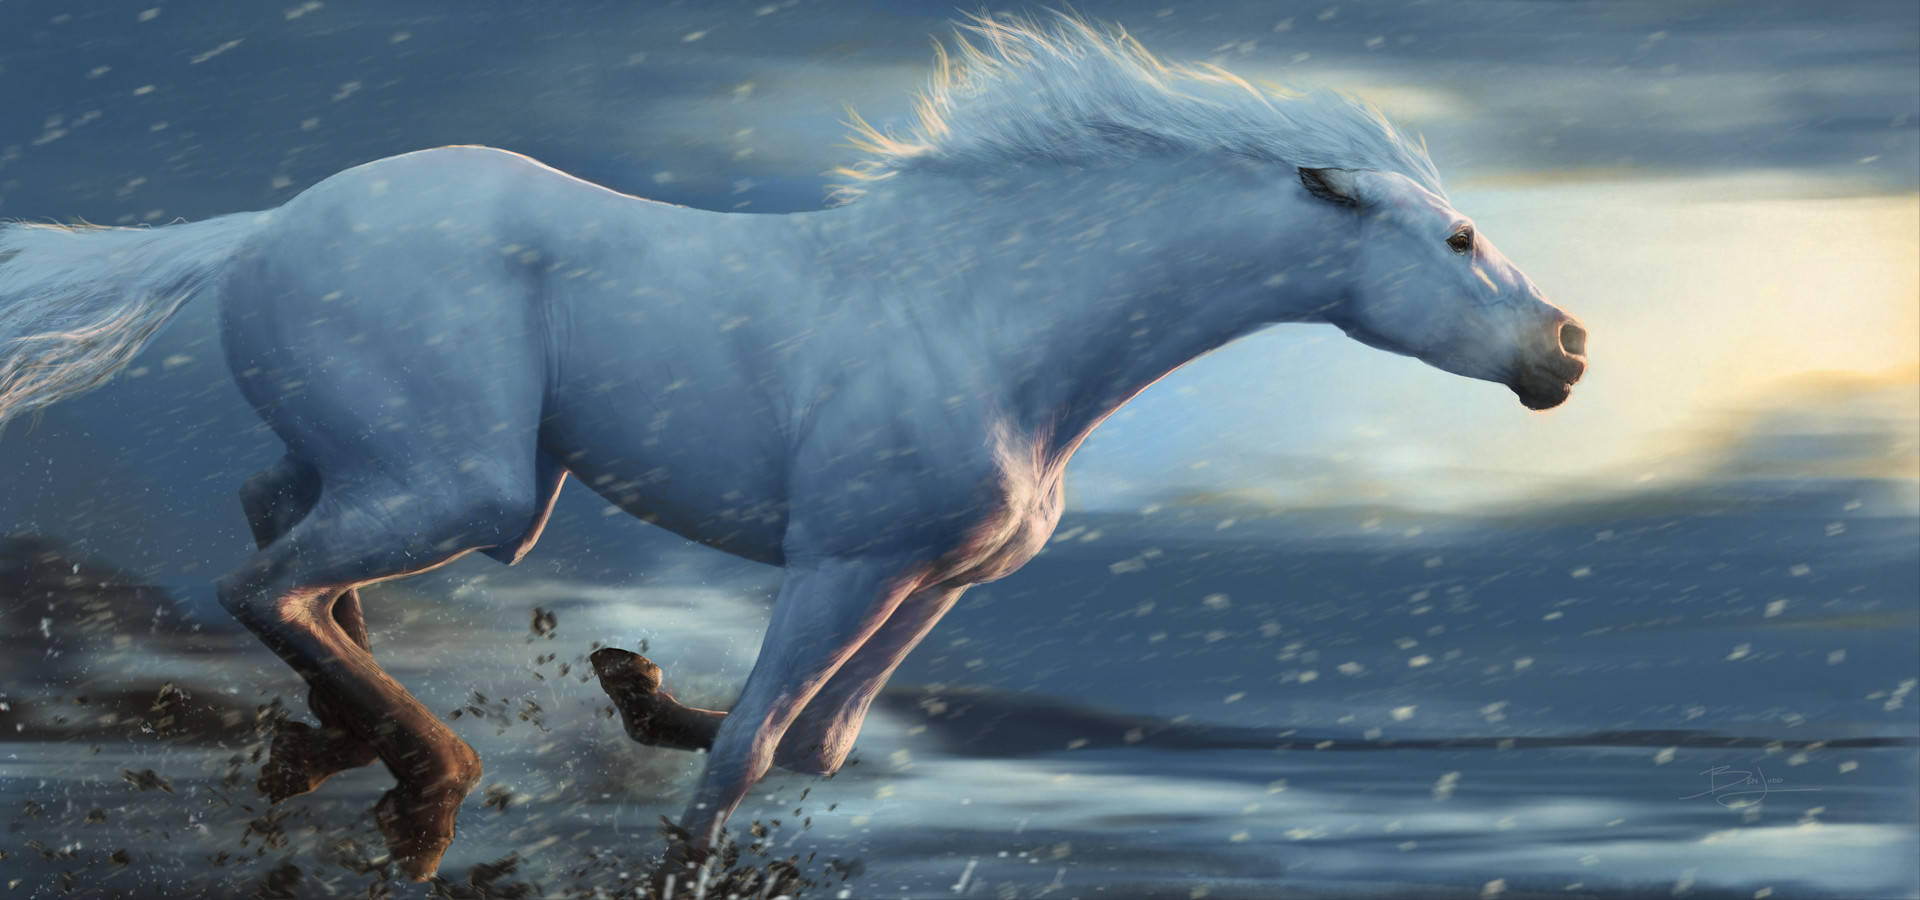 Free White Horse Wallpaper Downloads, [100+] White Horse Wallpapers for  FREE 